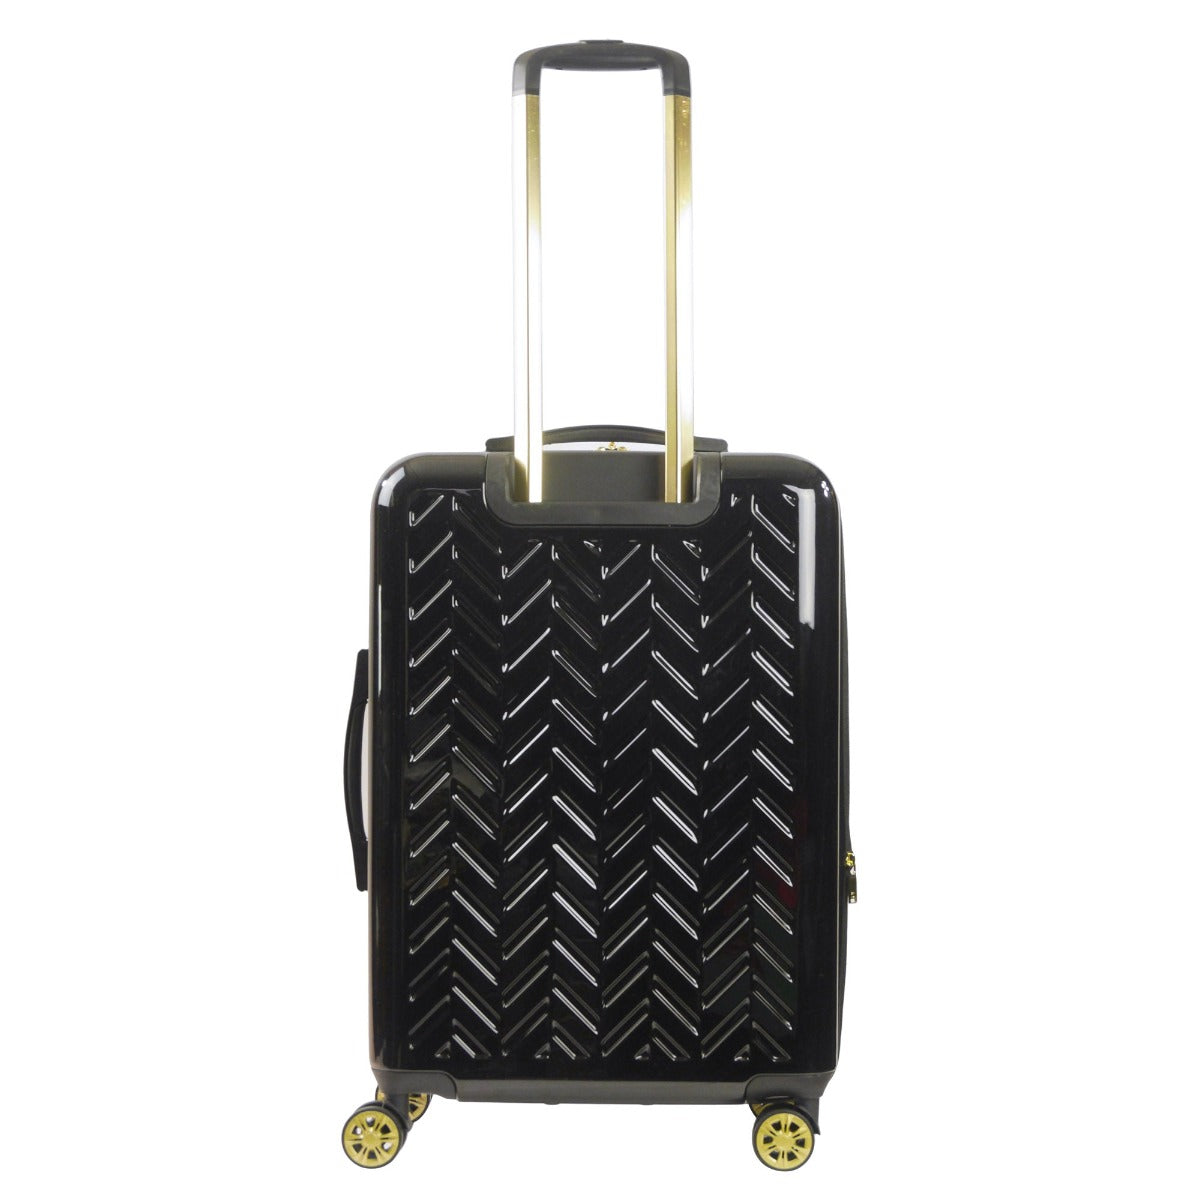 Ful Groove 27 inch hardside spinner suitcase check-in black luggage gold details